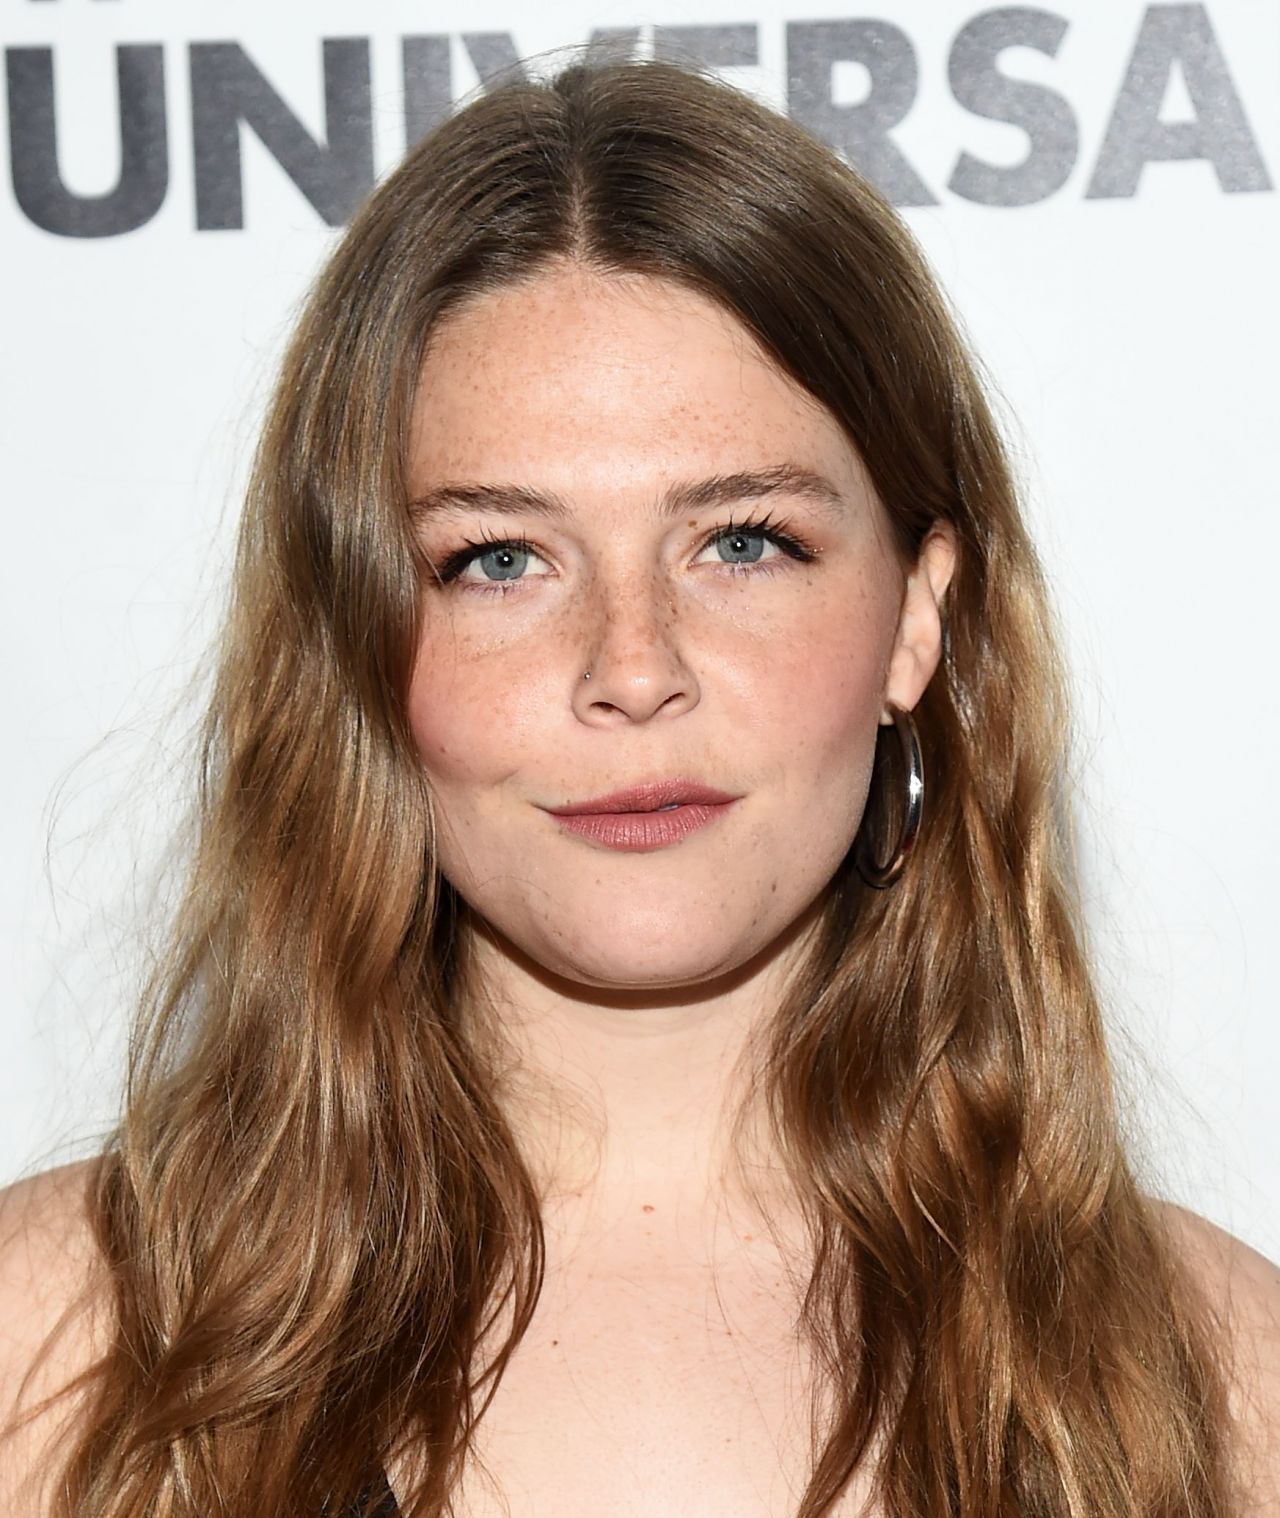 maggie-rogers-universal-music-group-grammy-after-party-02-10-2019-3.jpg